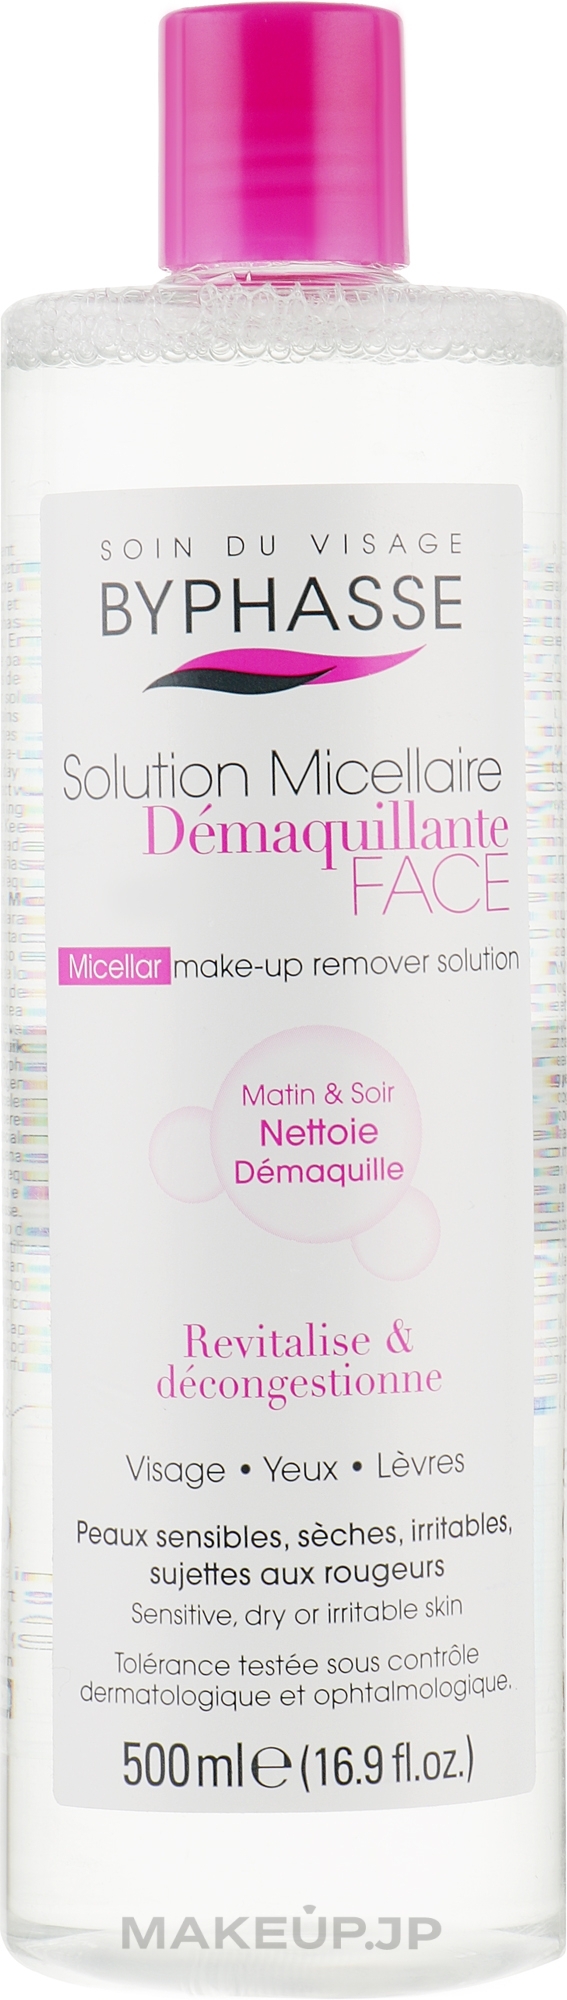 Cleansing Micellar Water for Face - Byphasse Micellar Make-Up Remover Solution Sensitive, Dry And Irritated Skin — photo 500 ml